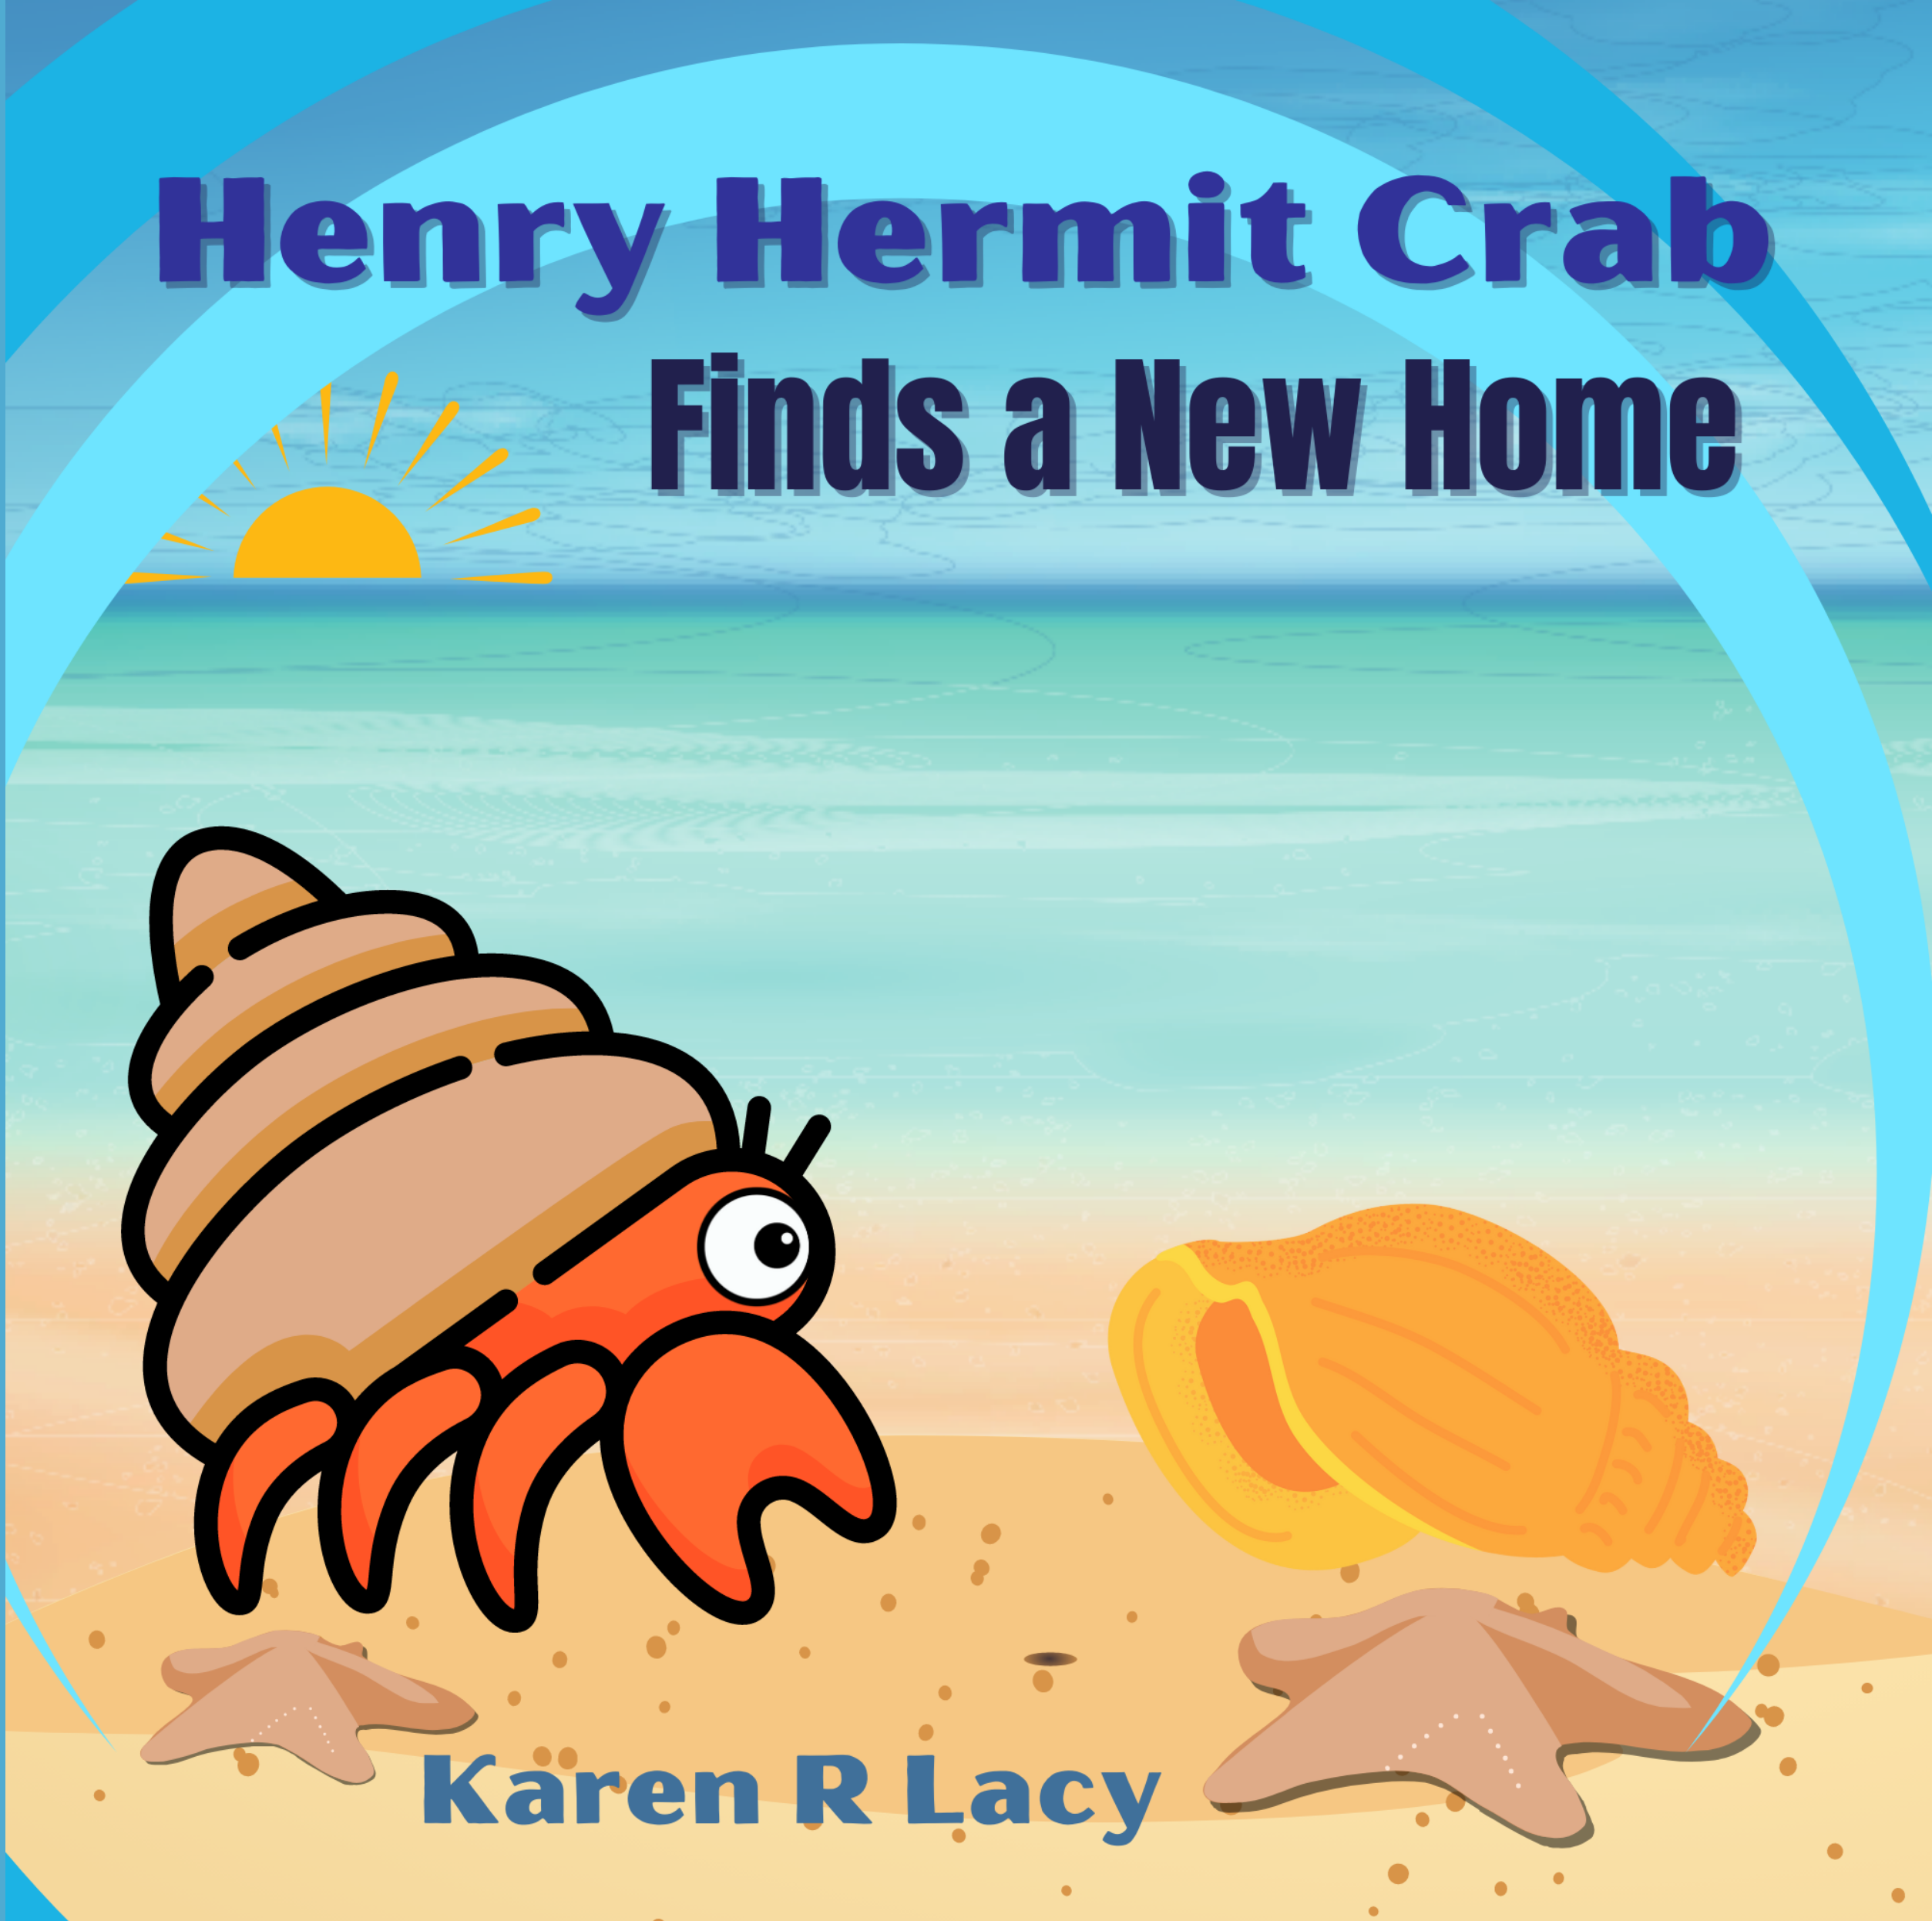 Henry Hermit Crab Finds a New Home by Karen R Lacy